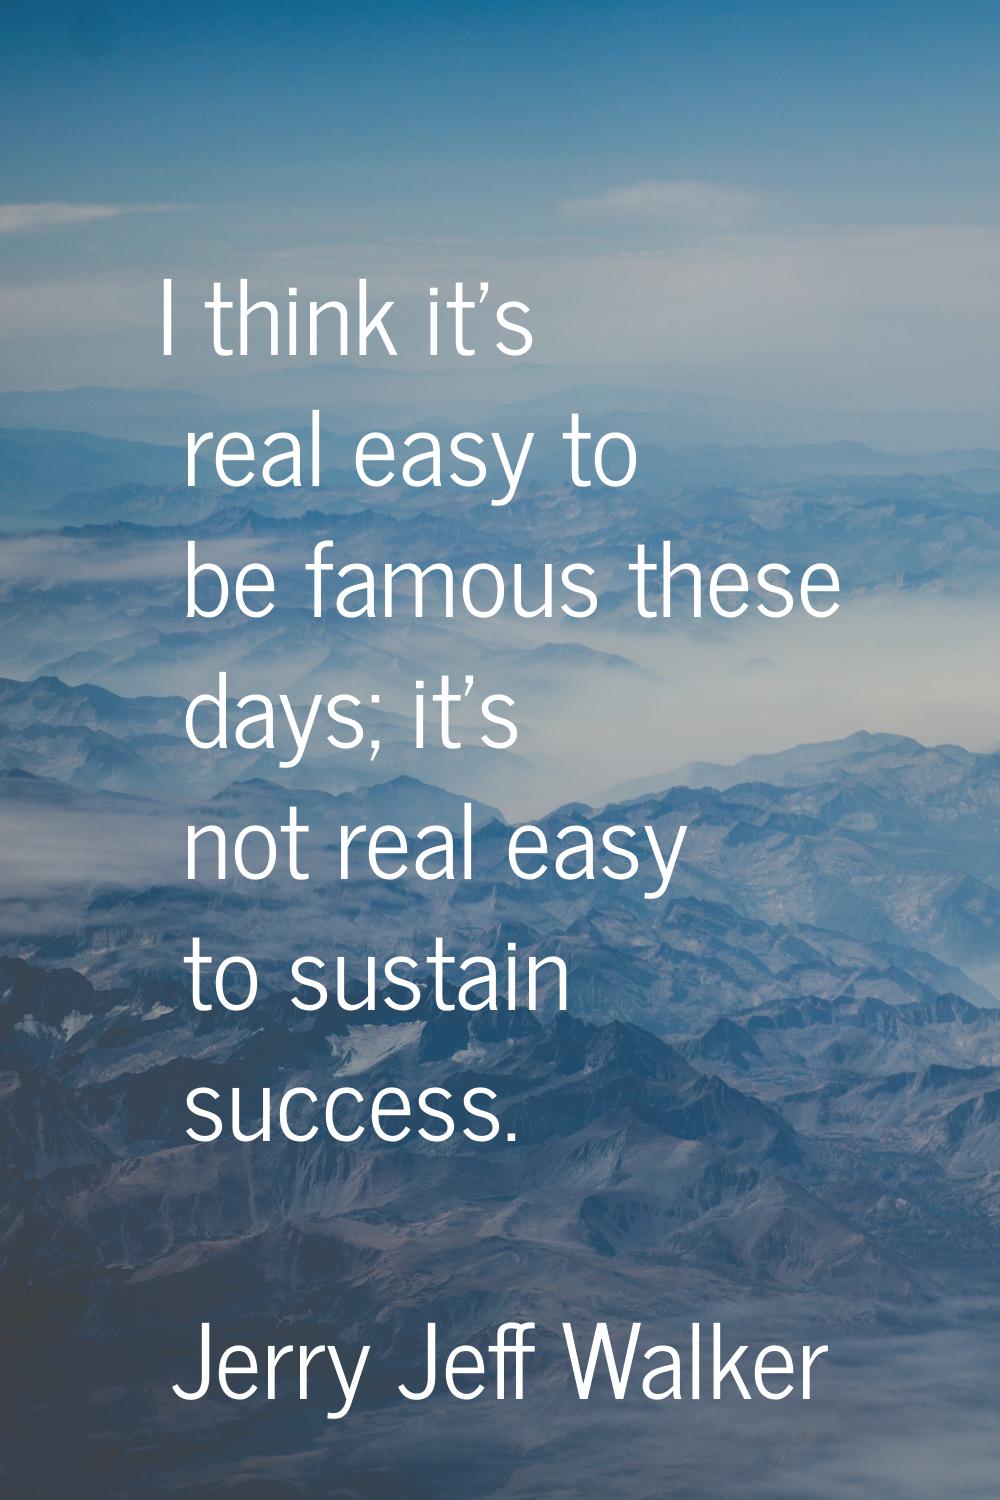 I think it's real easy to be famous these days; it's not real easy to sustain success.